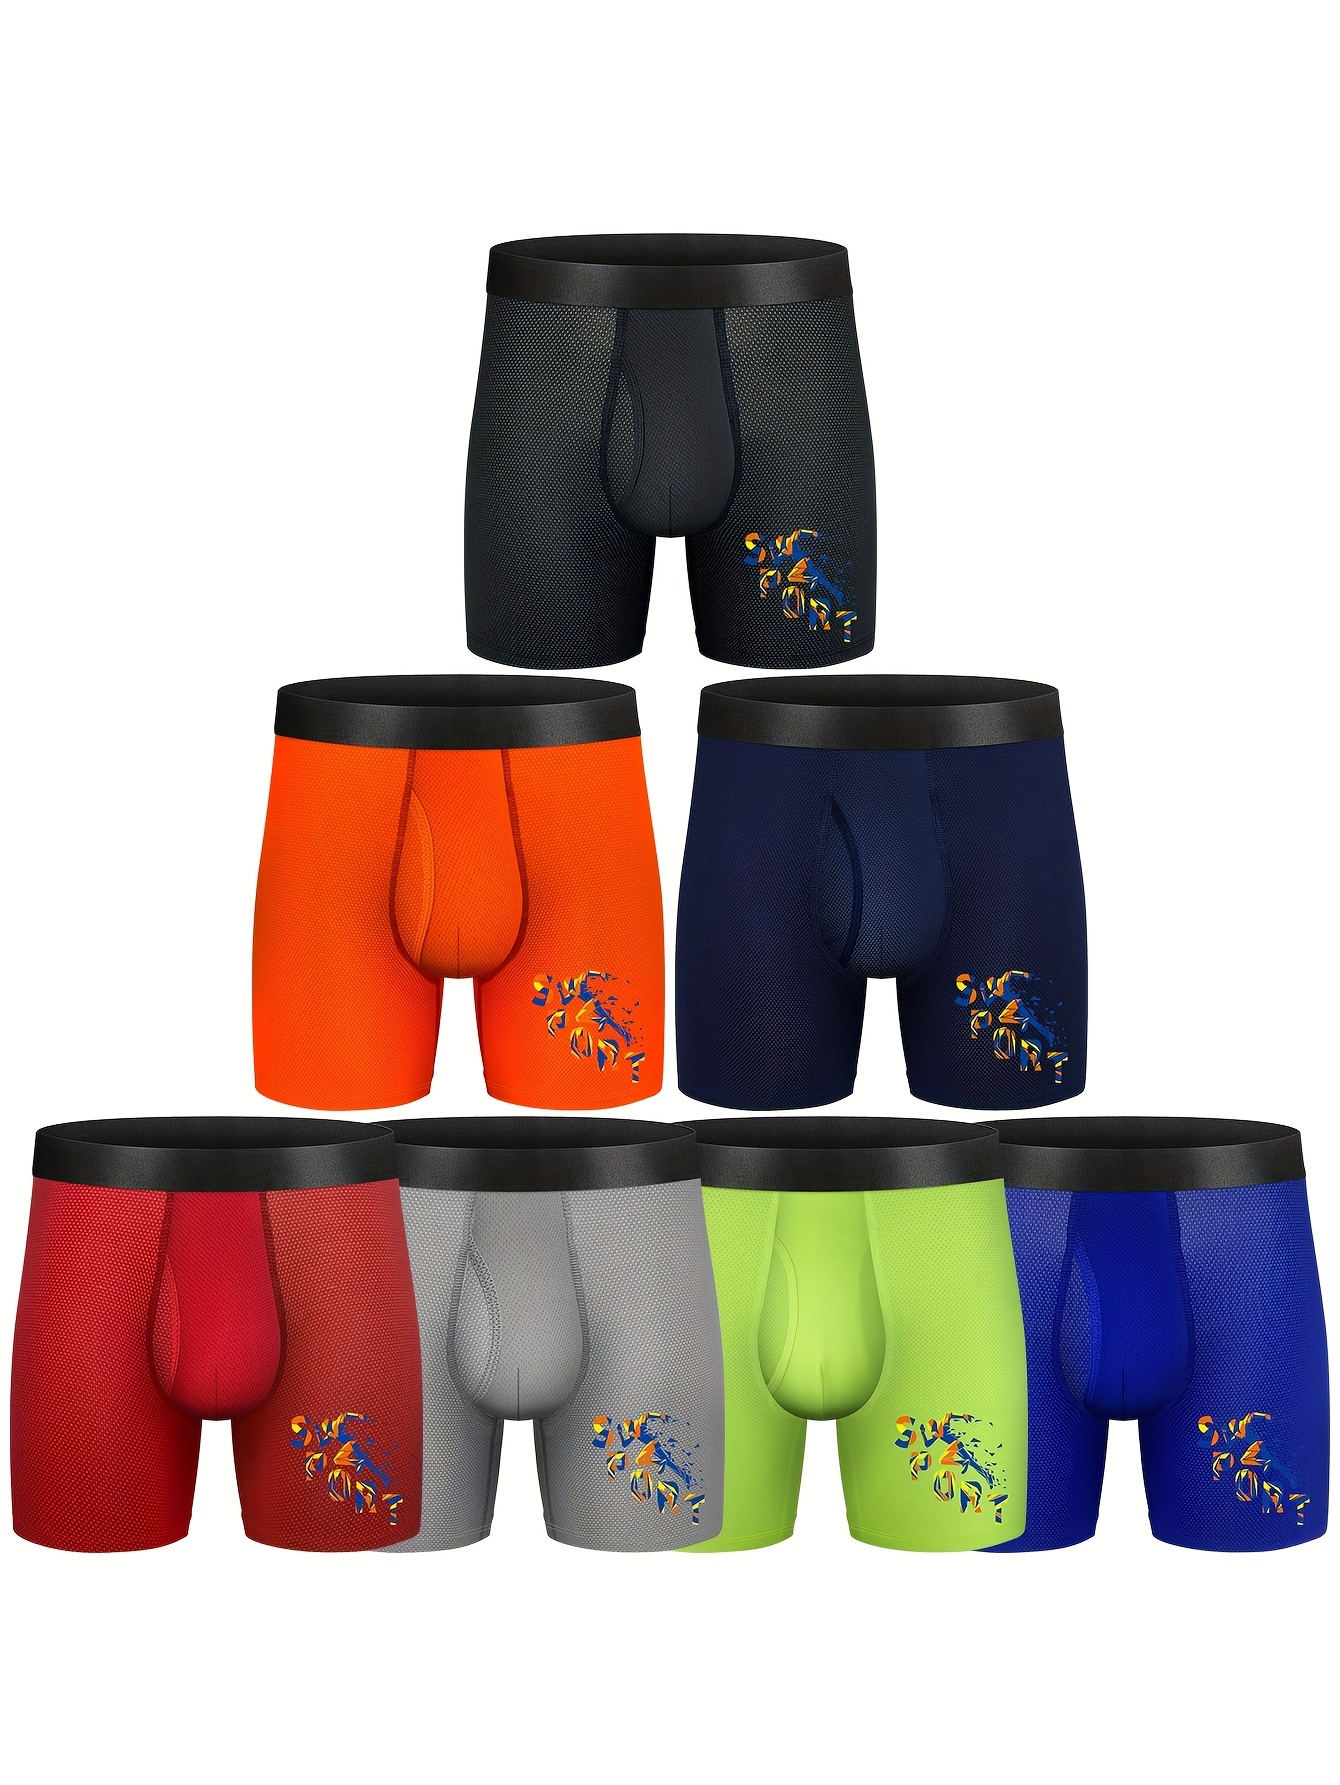 Men's Boxer Briefs Comfortable Cotton Stretch Quick Dry Sports Underwear  Regular and Long Leg Available